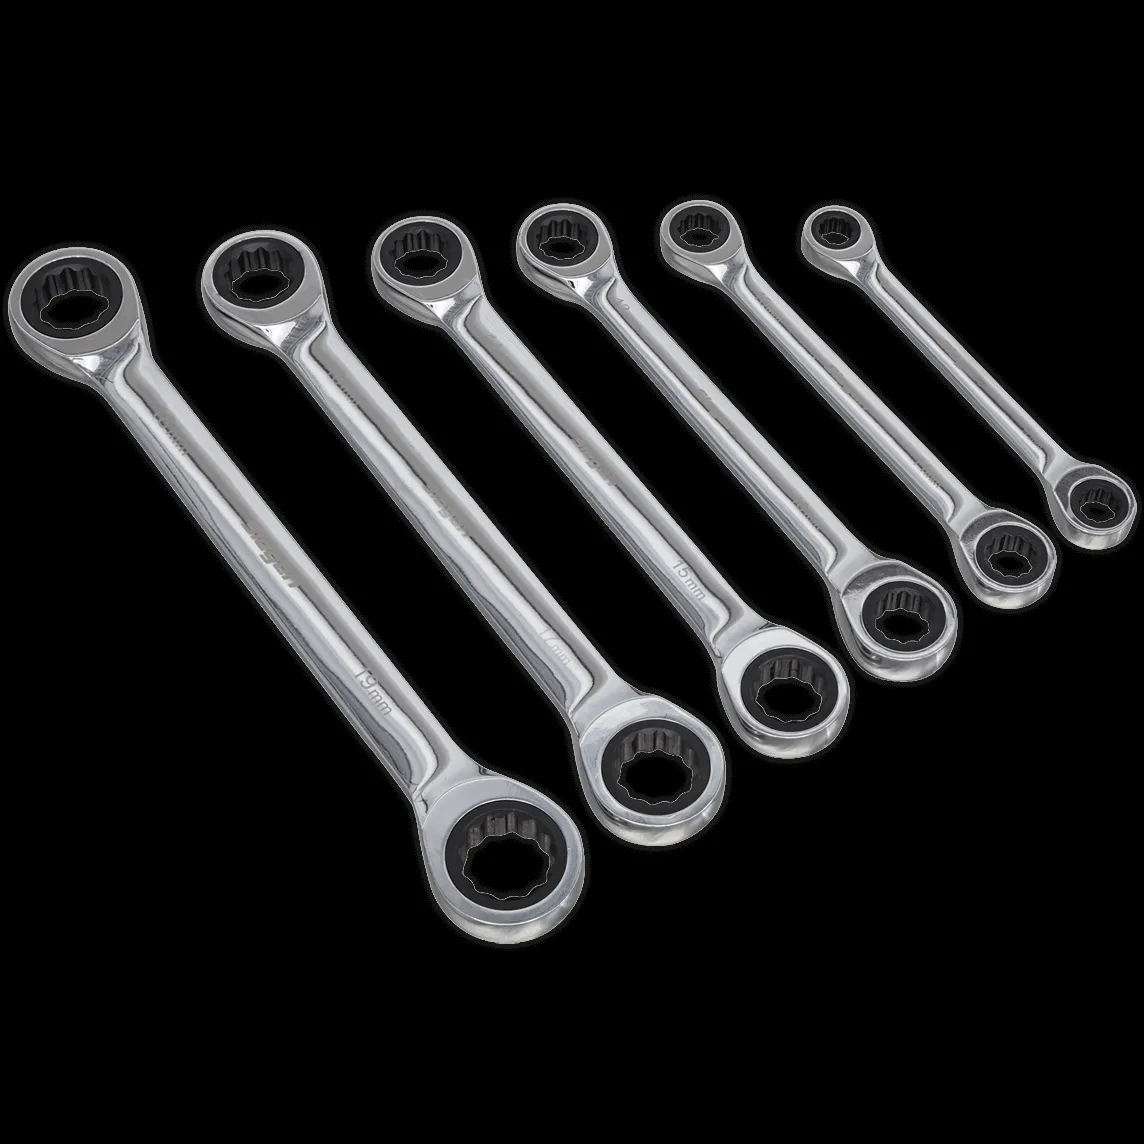 Siegen S0636 6 Piece Double Ended Ratchet Ring Wrench Set